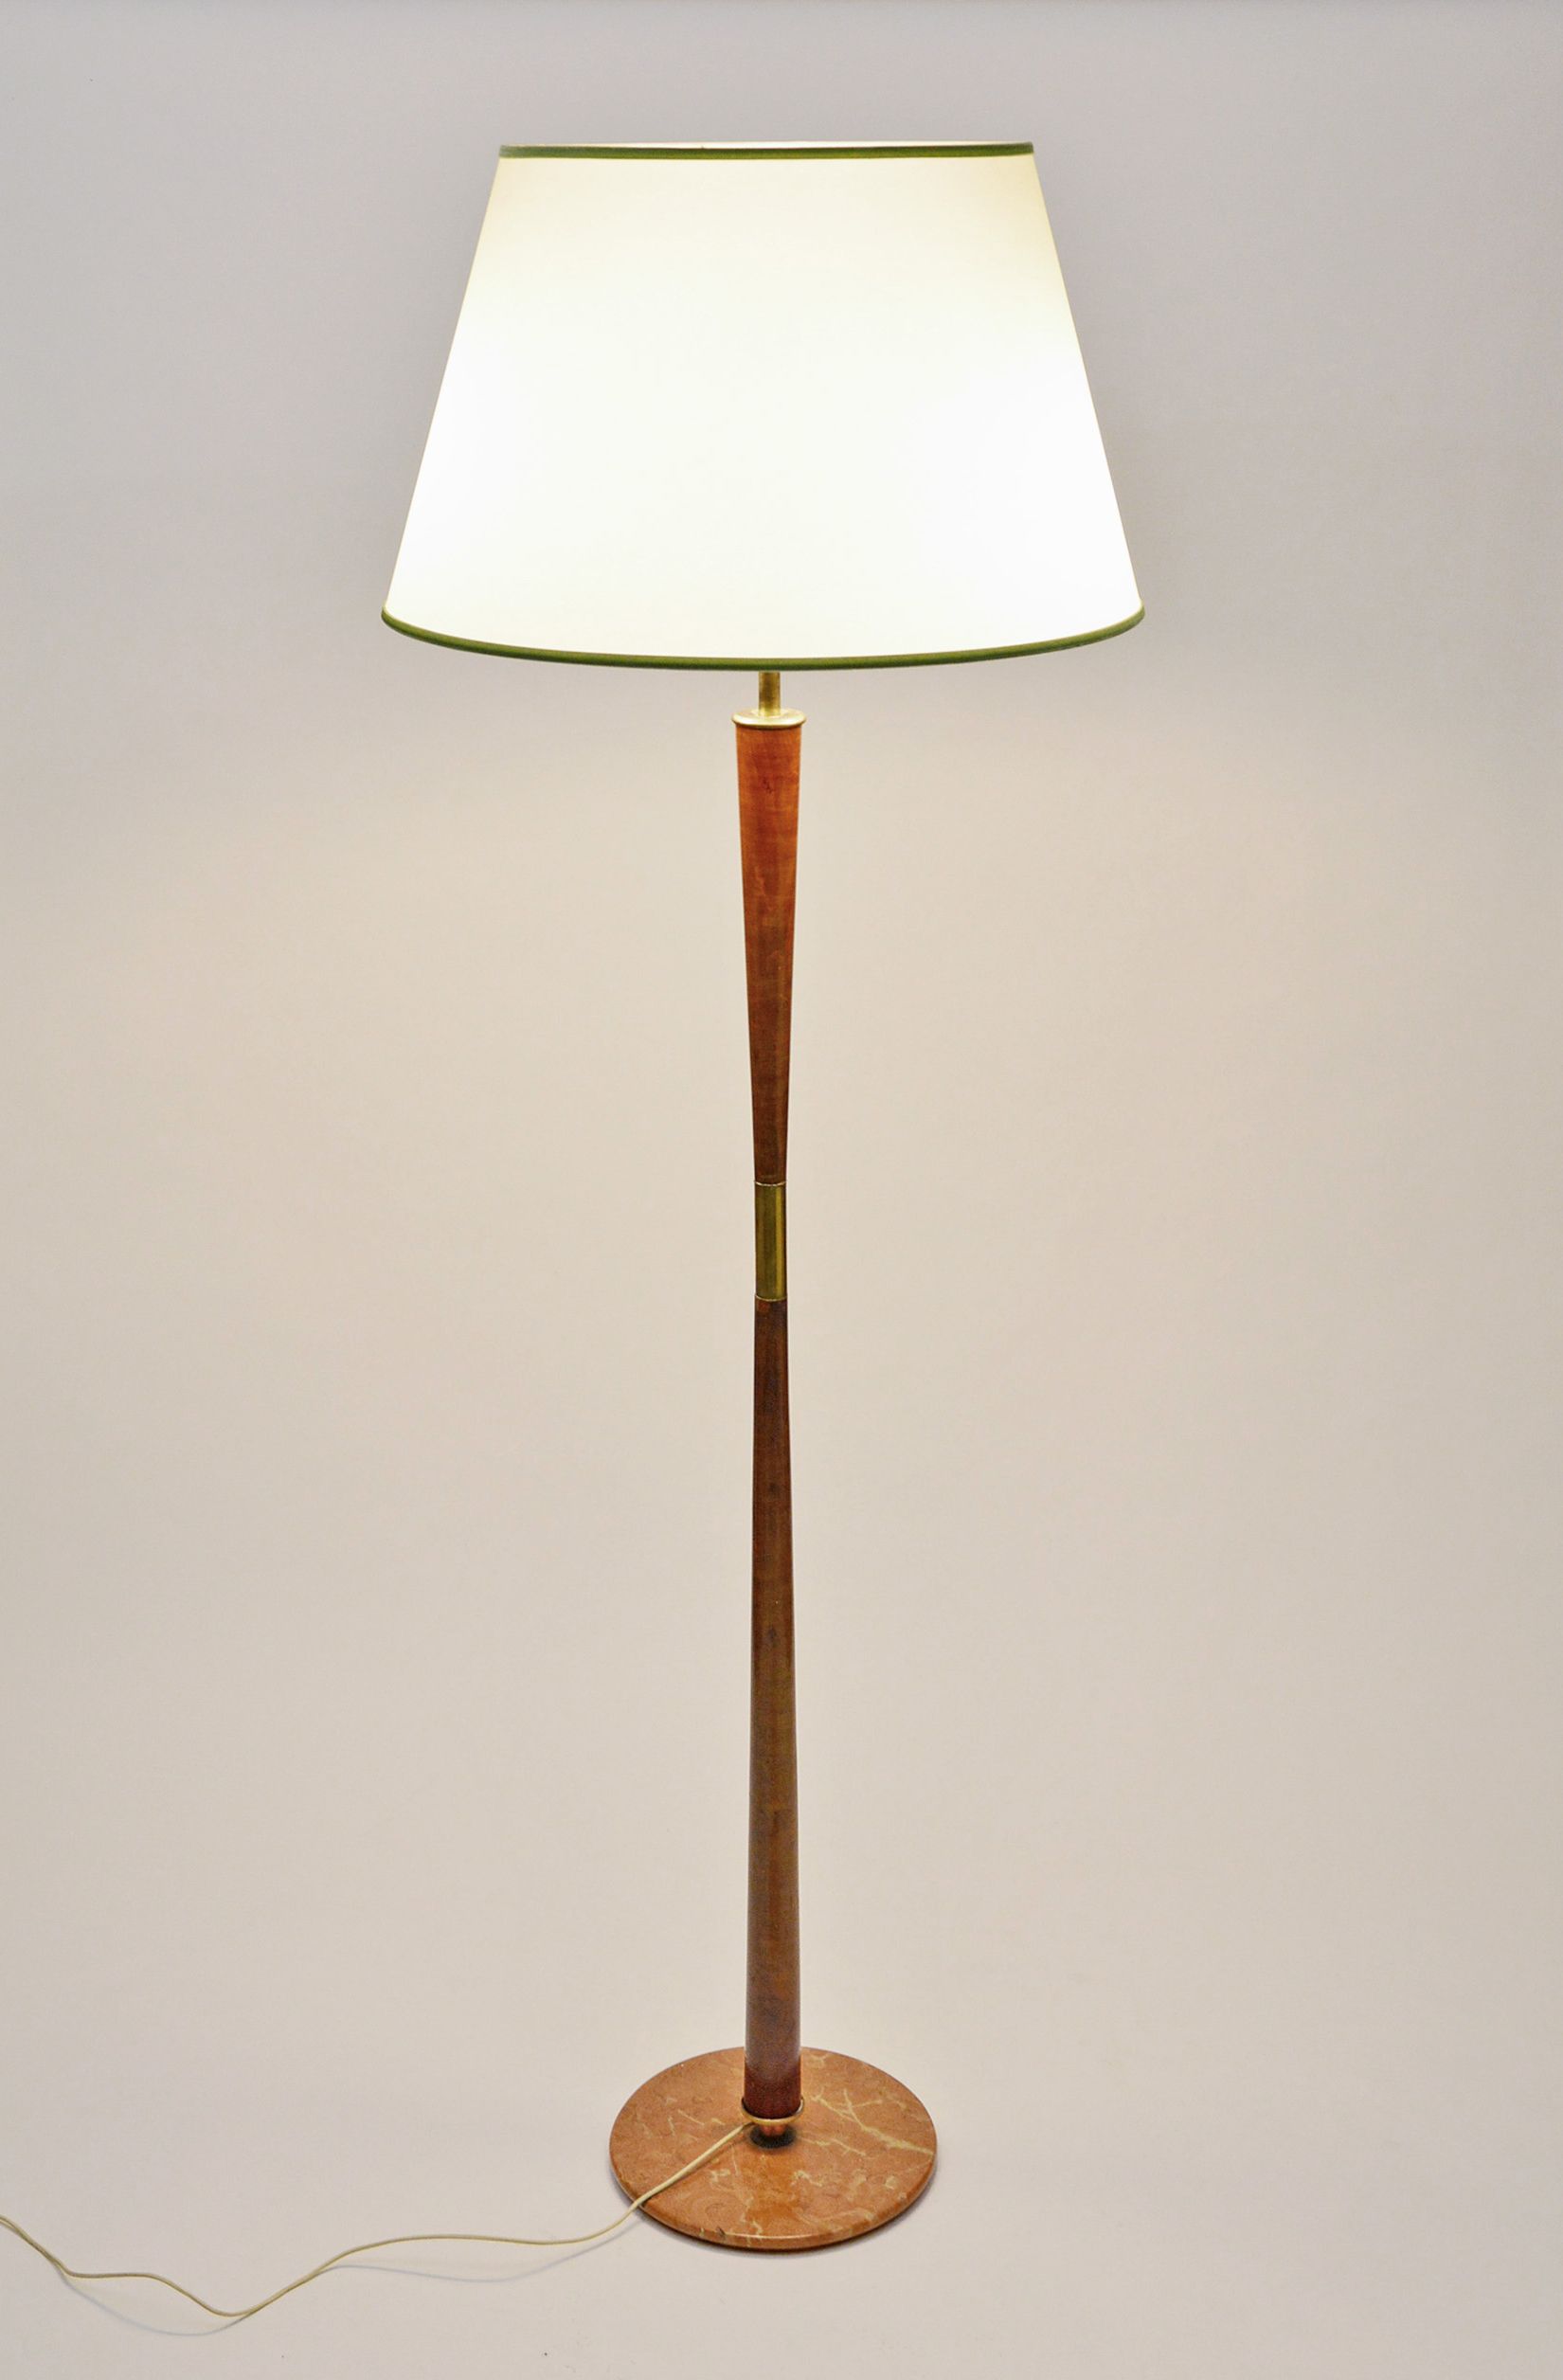 Wood And Brass Floor Lamp With Marble Basestilnovo, 1940s | Intondo Inside Marble Base Floor Lamps (View 4 of 20)